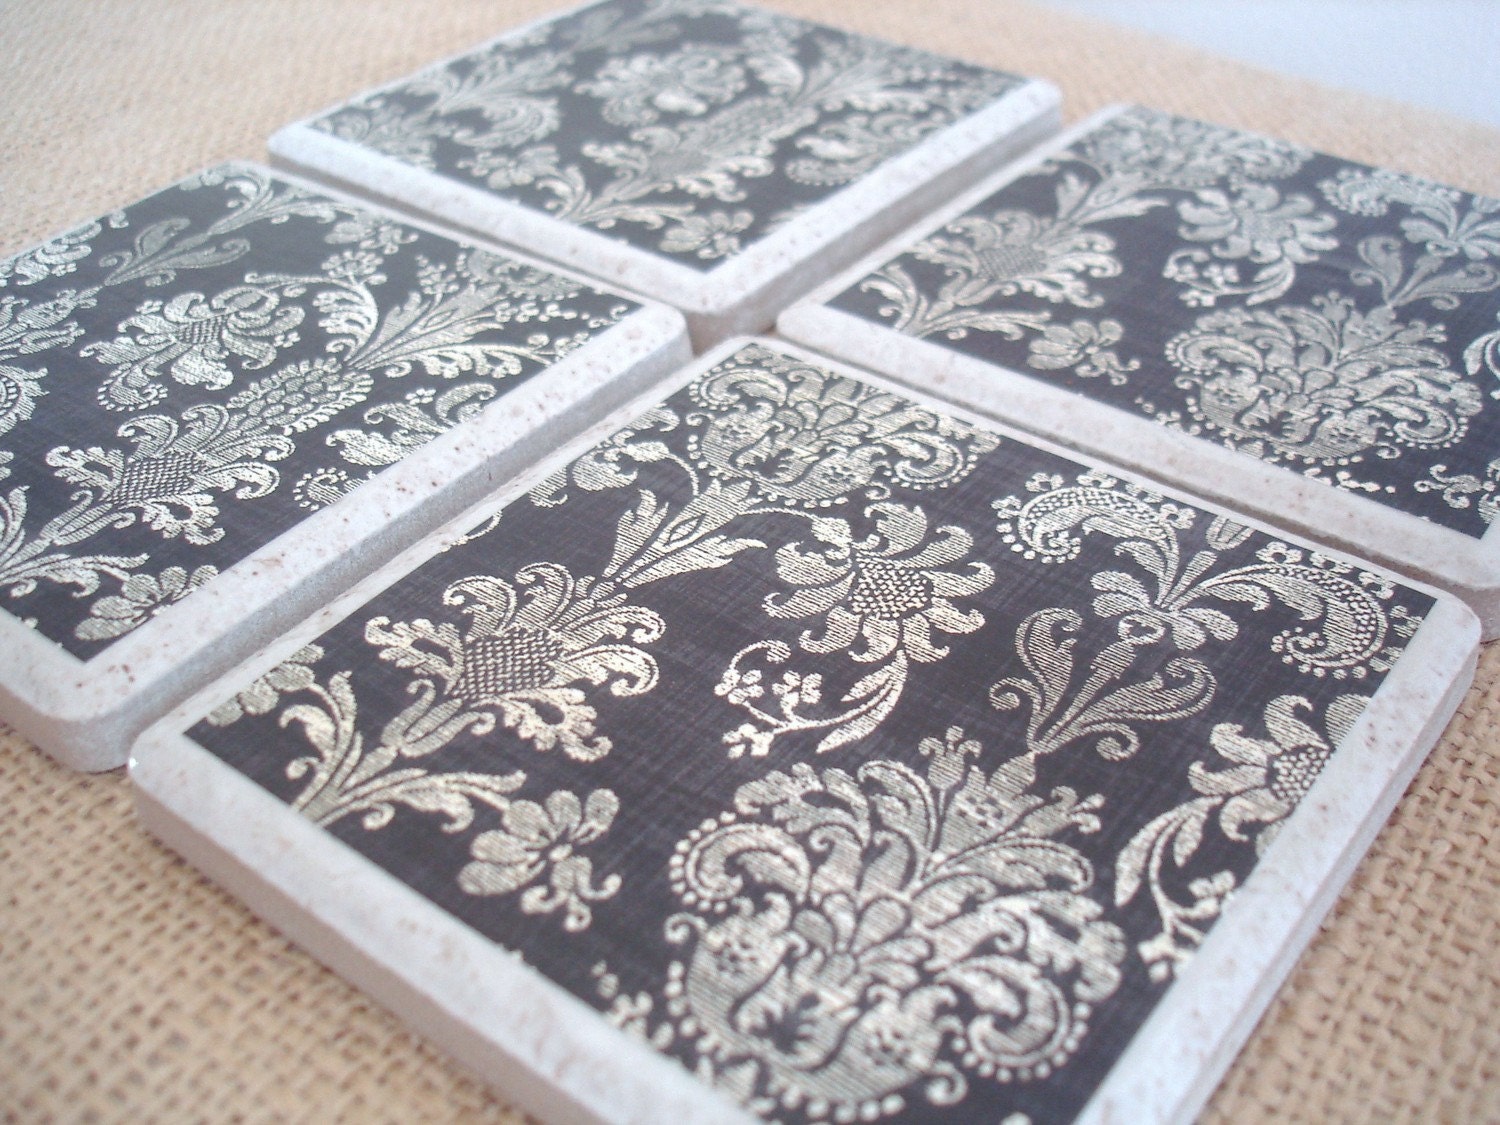 Shabby Damask Coasters-A Vintage-Inspired Set by burlap and blue